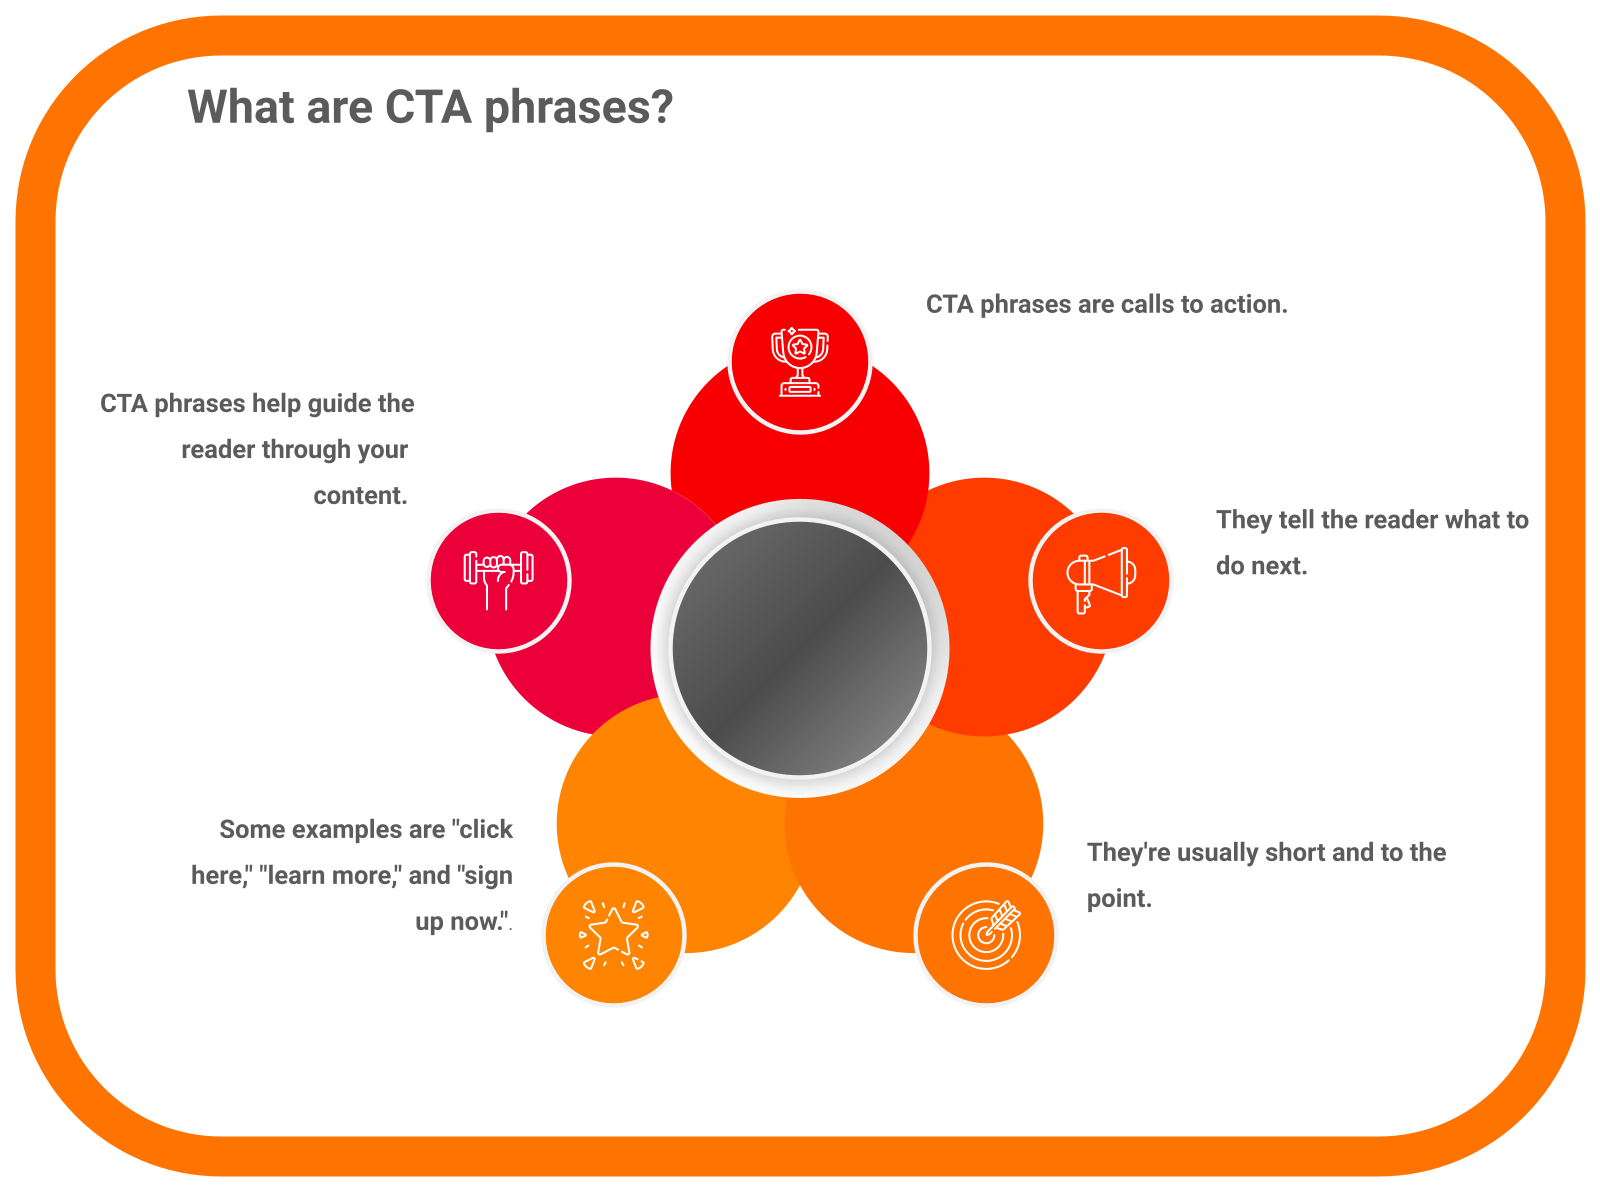 What are CTA phrases?